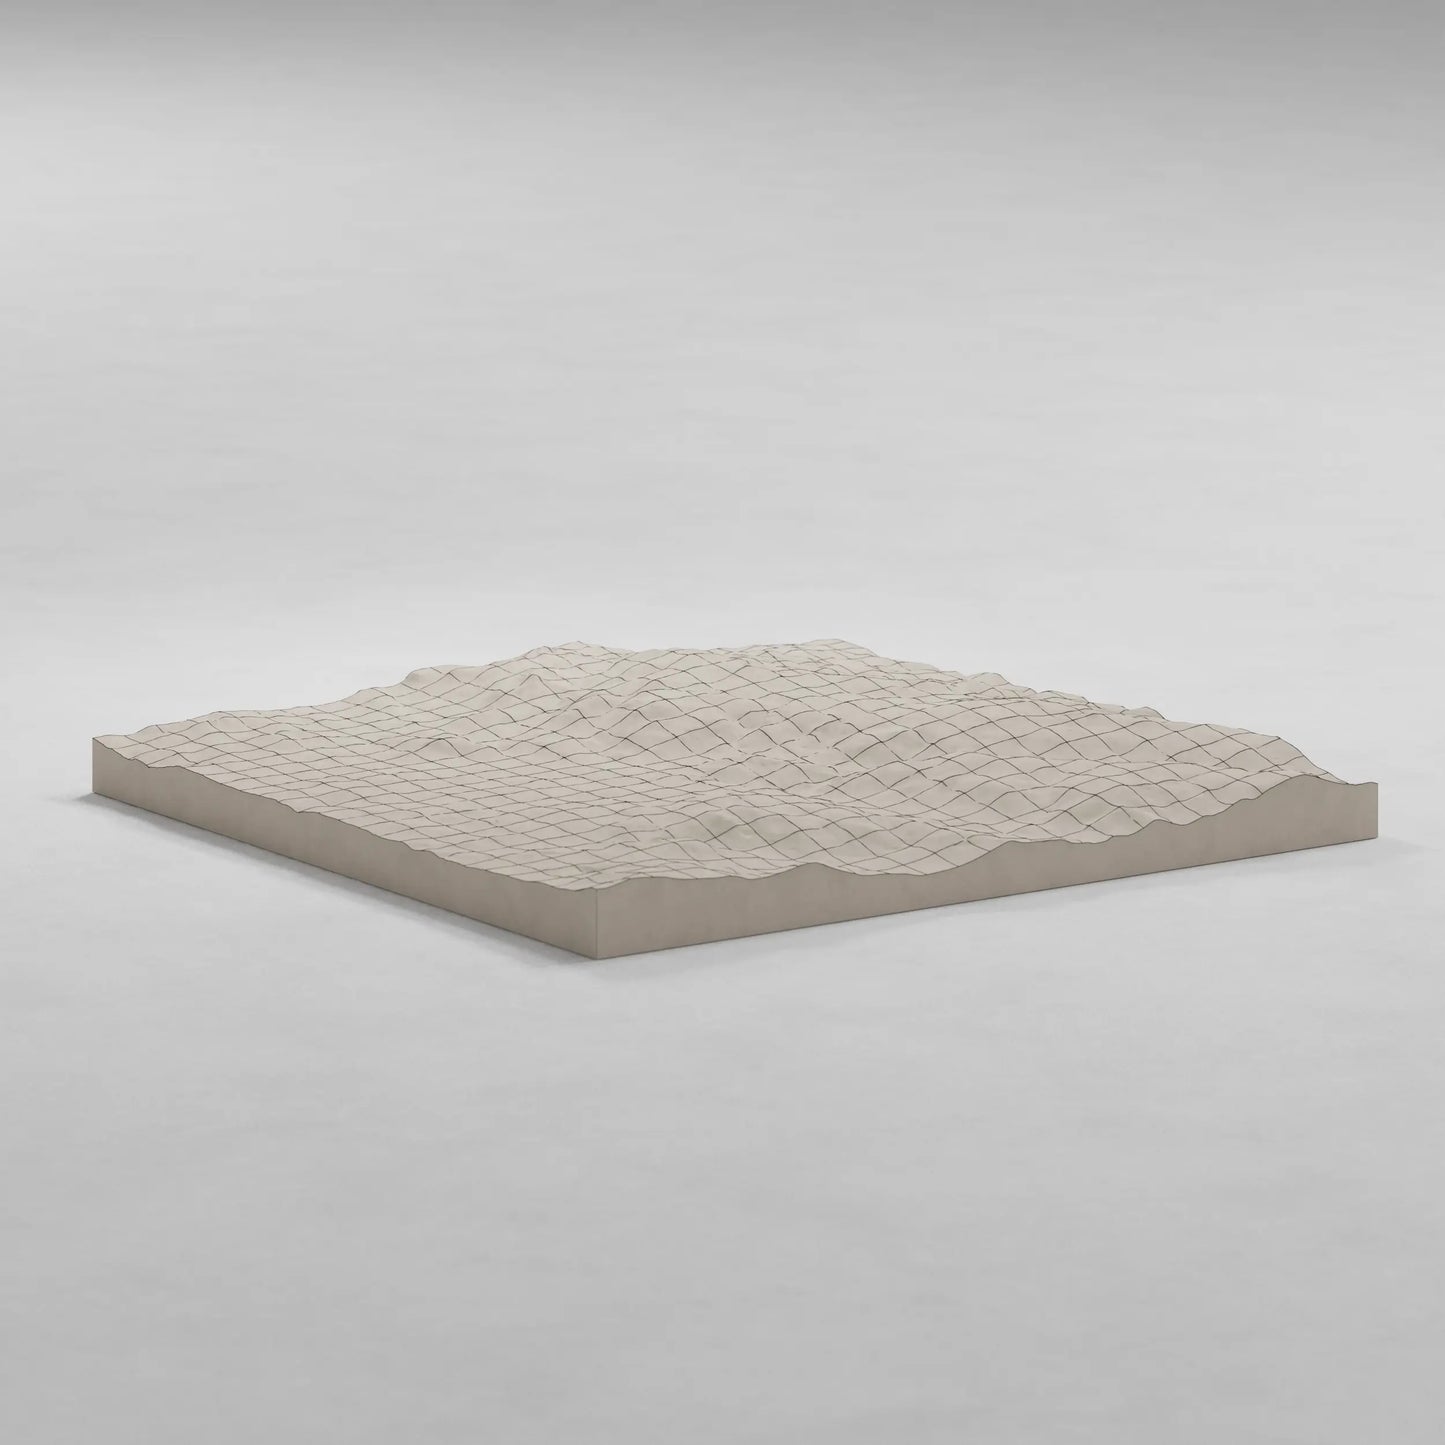 PARAGAMI 03_01 - TOPOGRAPHY EXTRACT - TEMPLATE for 3D HANDMADE PAPER WALL ART_ PARAMETRIC DESIGN